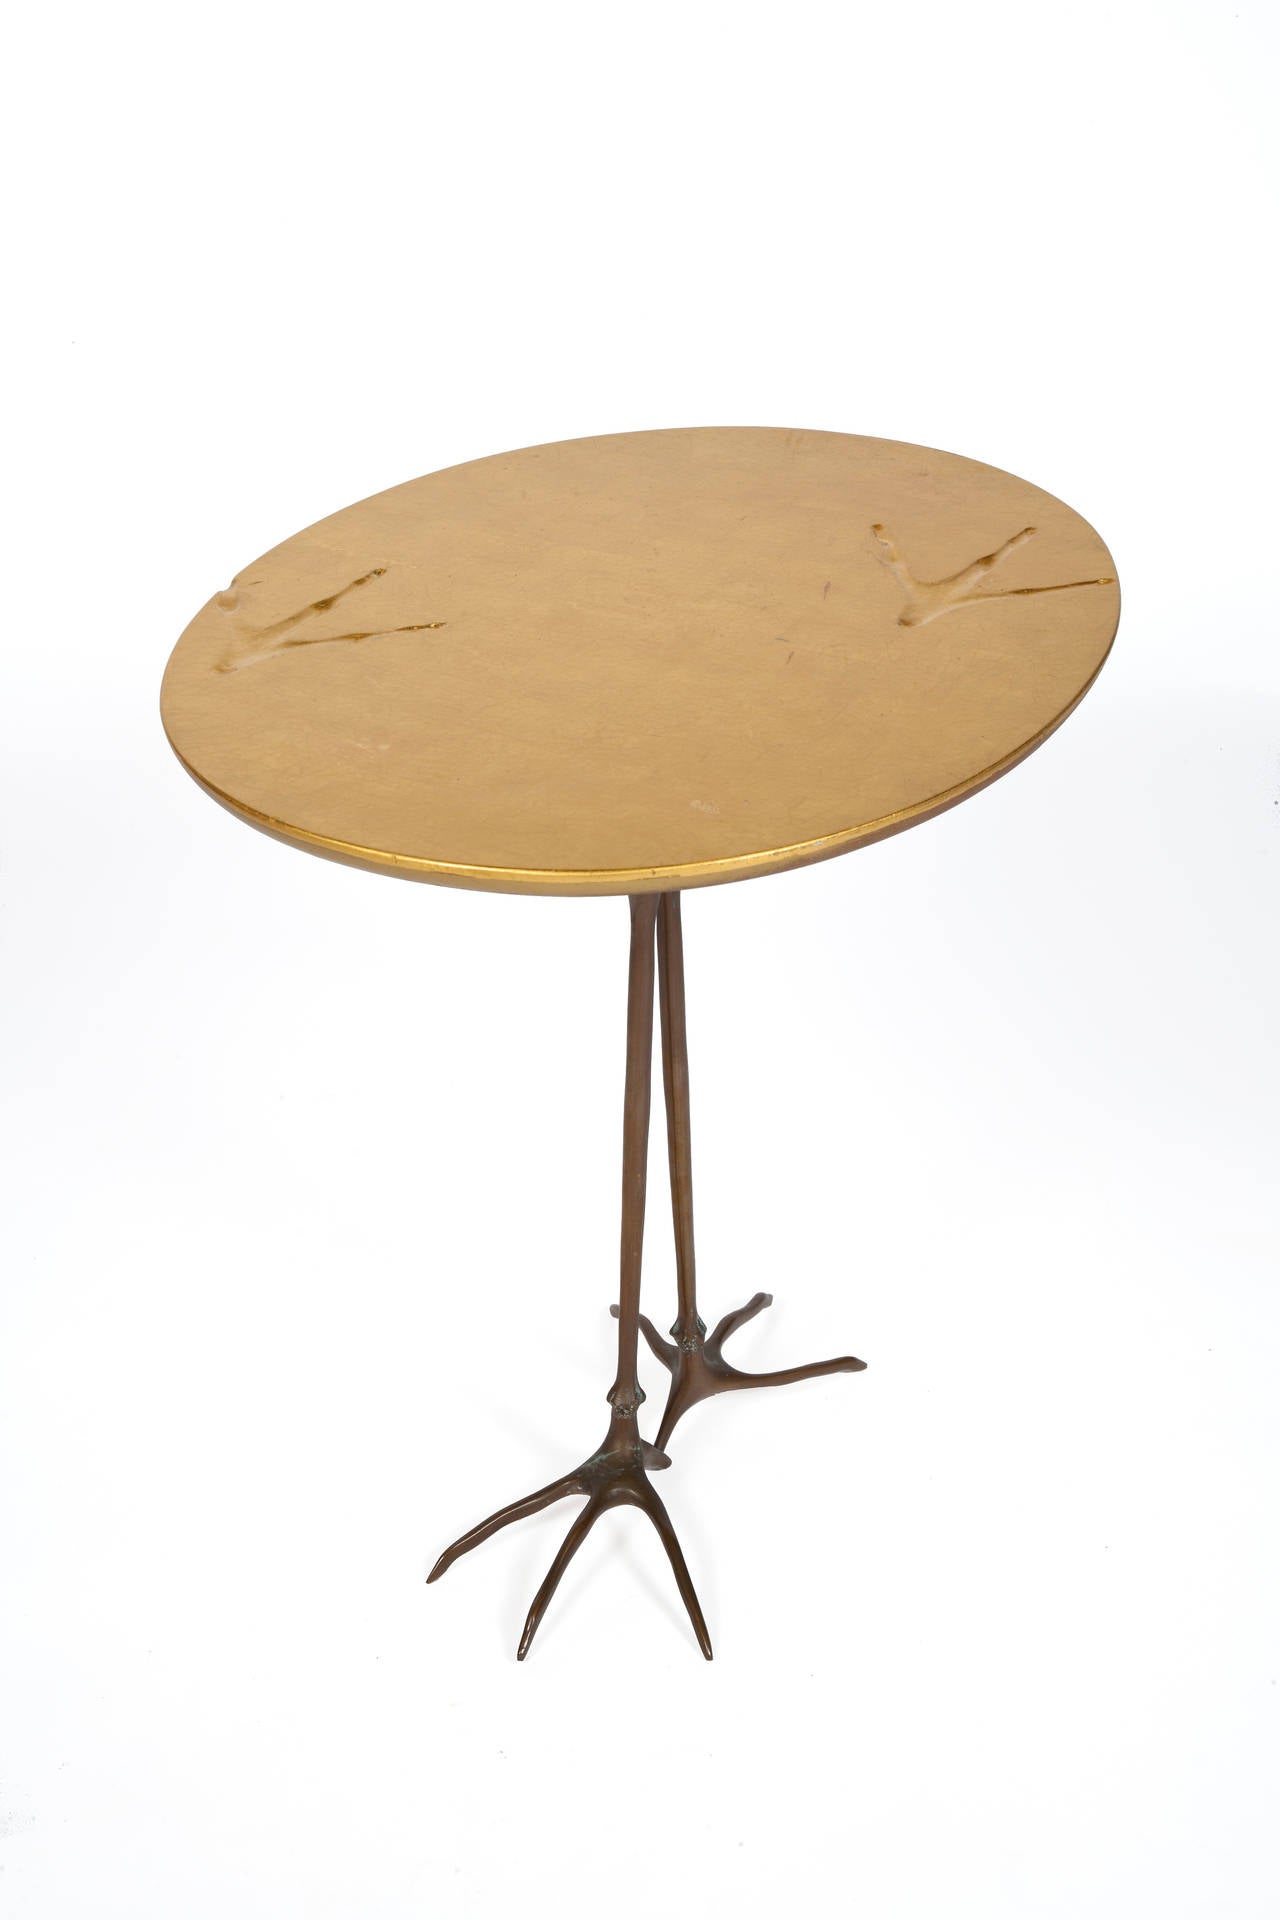 Italian 'Traccia' Table by Meret Oppenheim